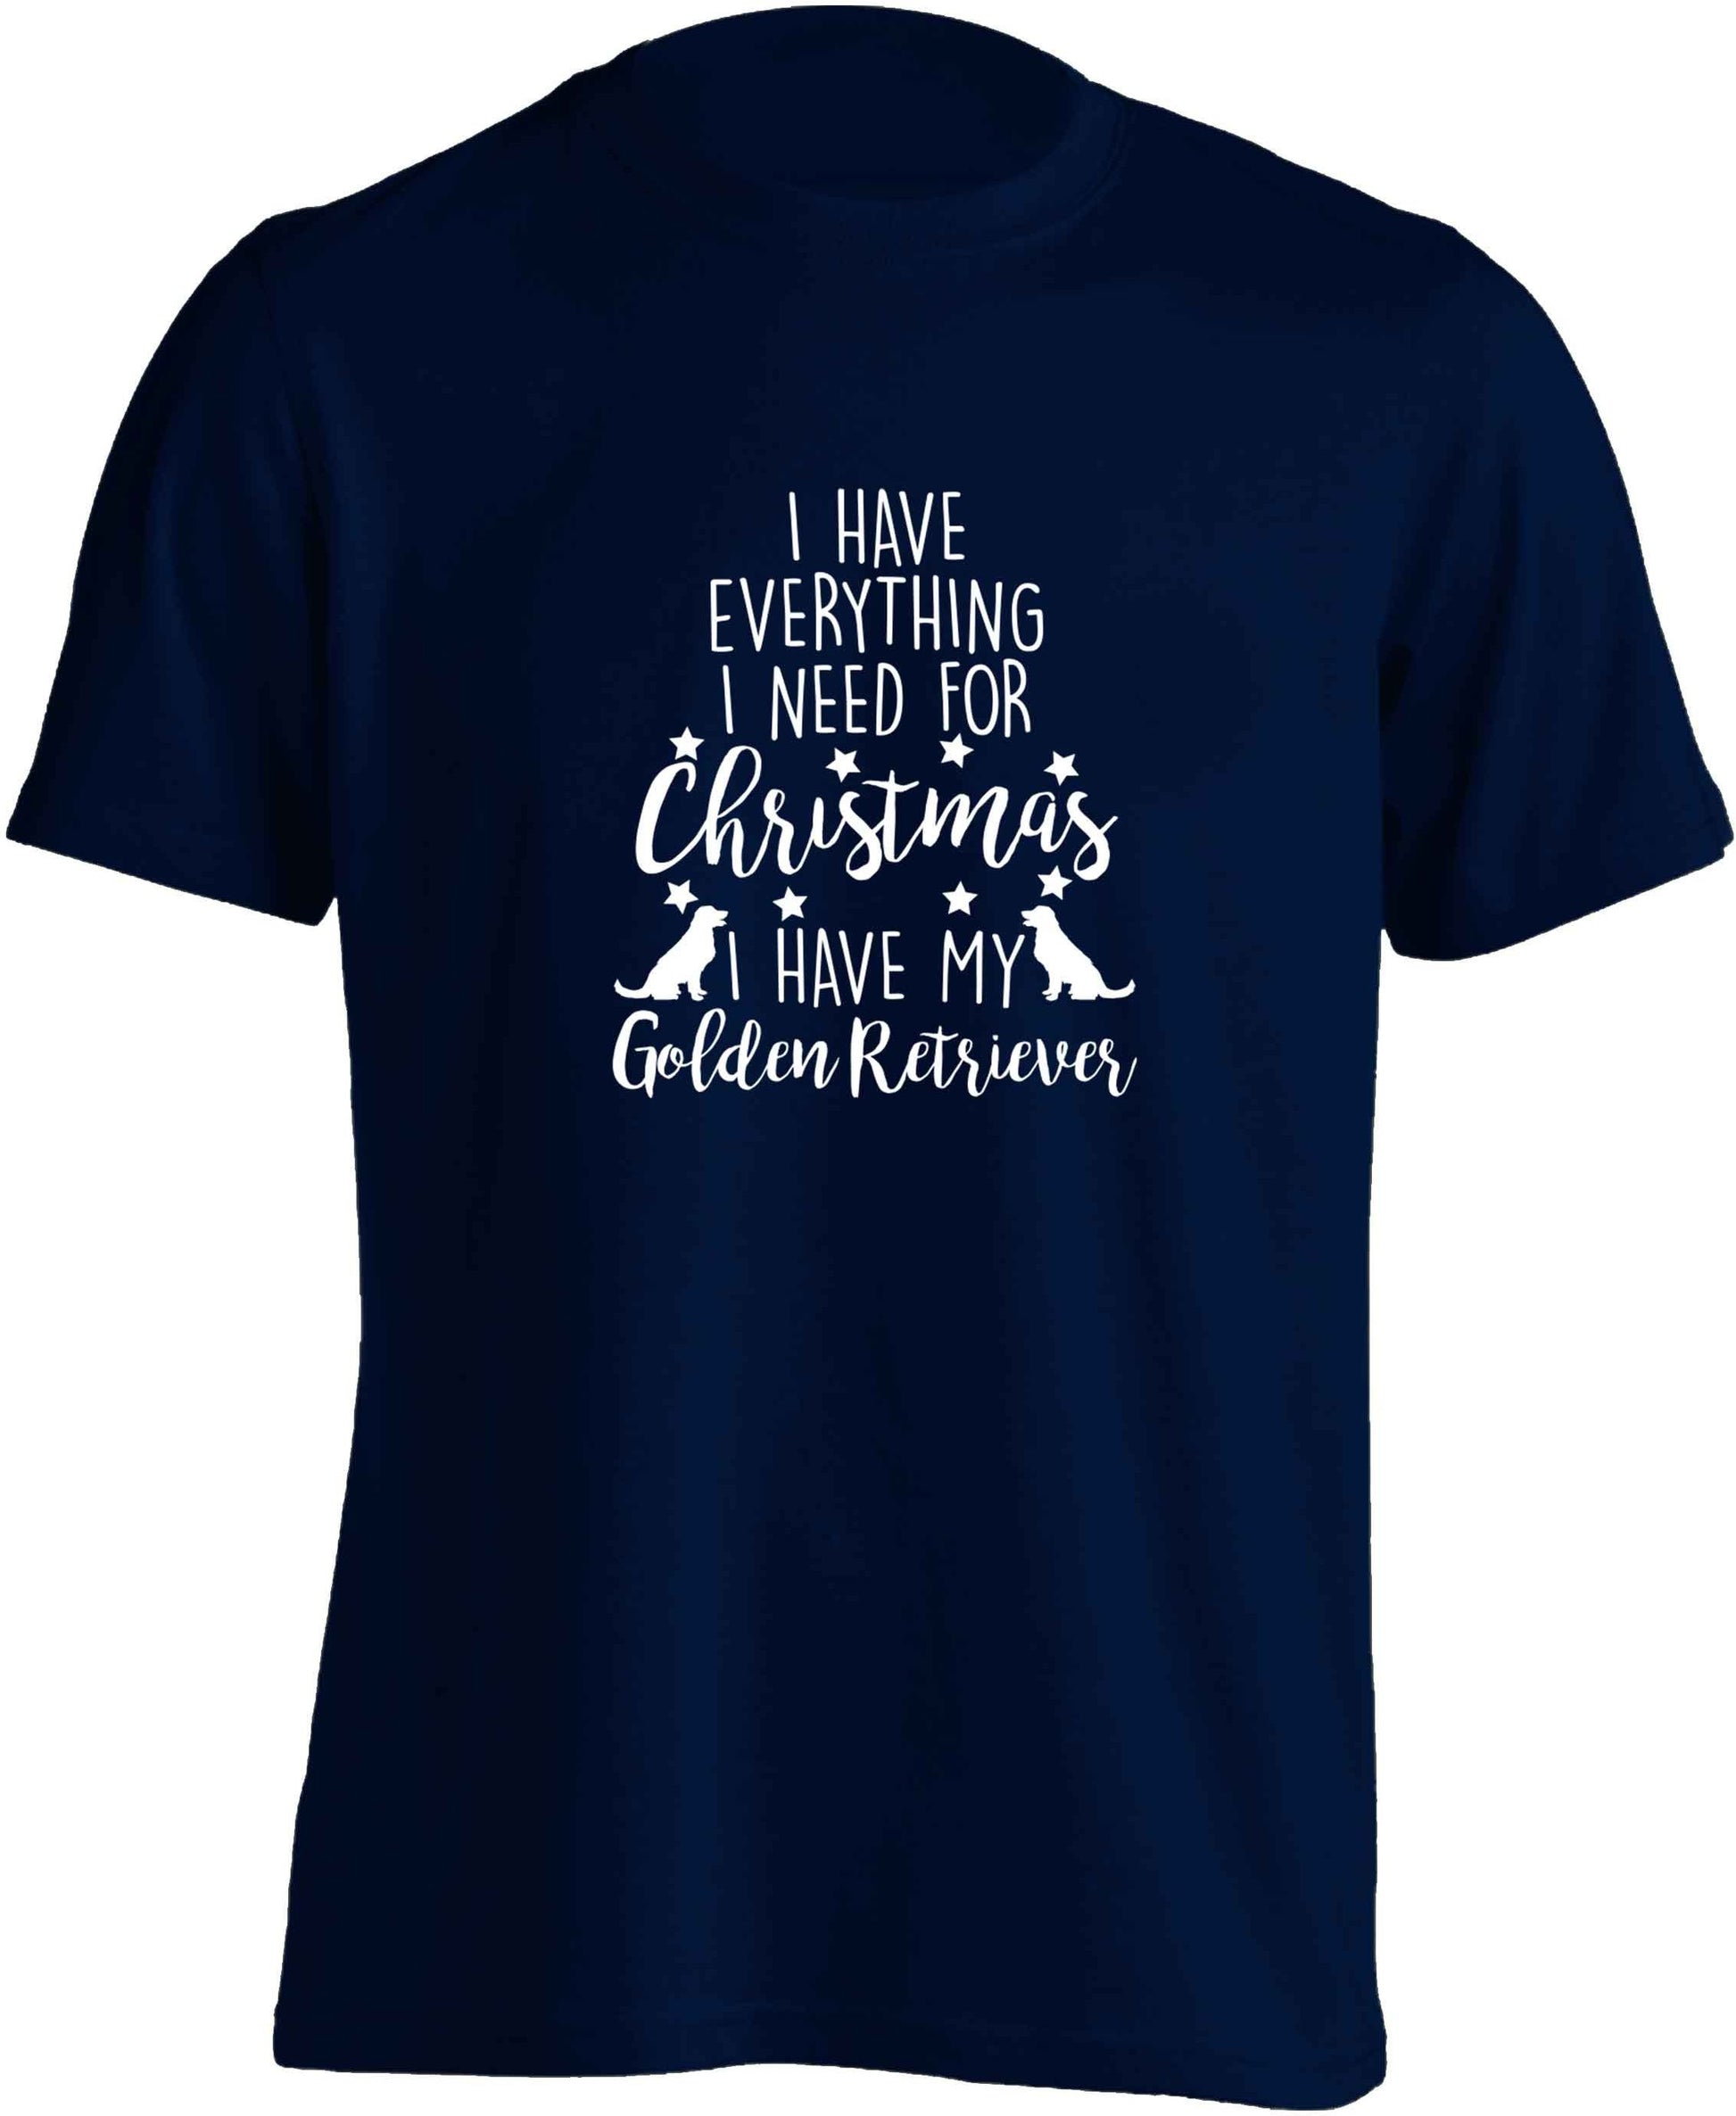 I have everything I need for Christmas I have my golden retriever adults unisex navy Tshirt 2XL